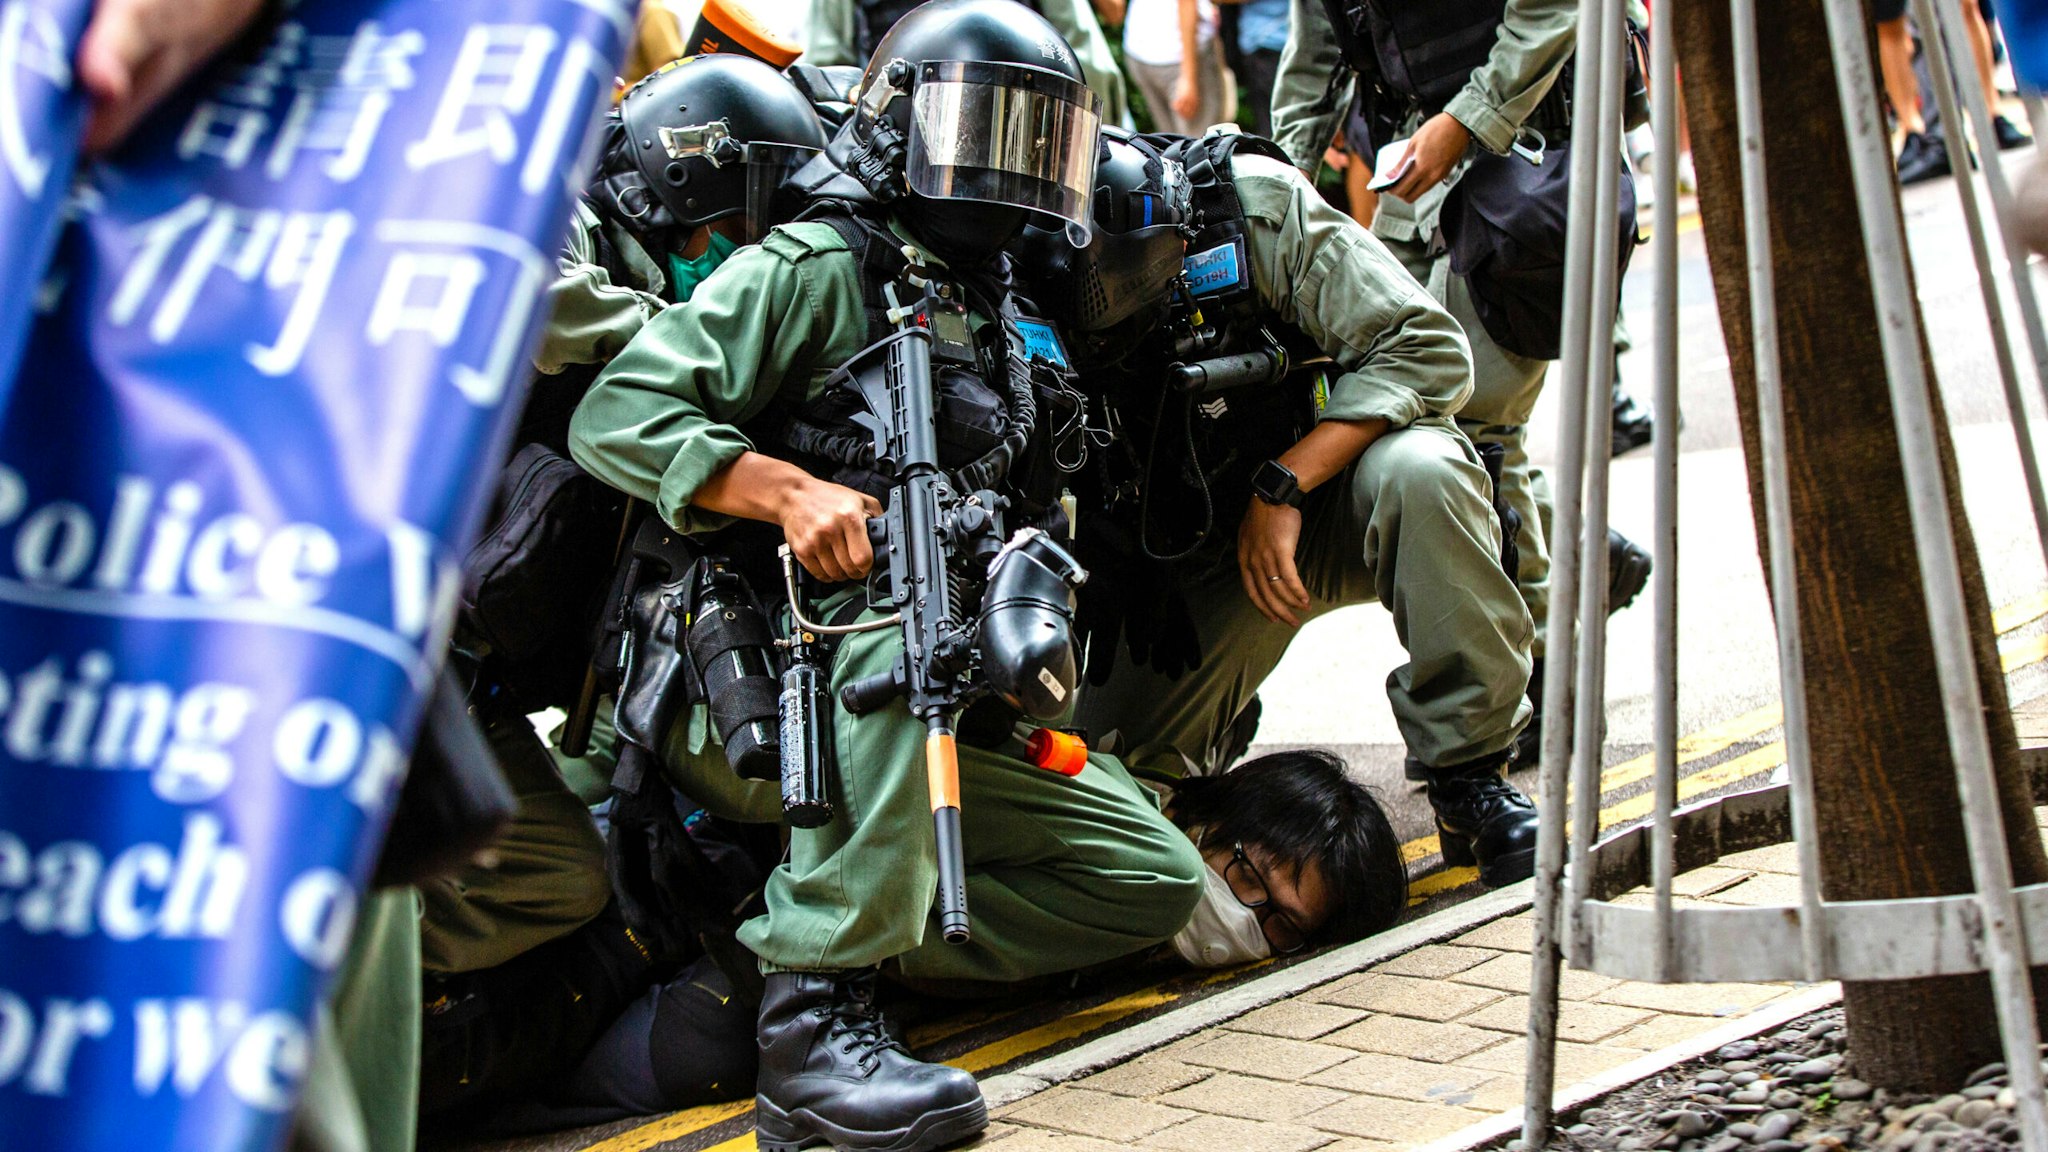 HONG KONG, CHINA - 2020/07/01: Riot police officers pinning down a protester during the demonstration. Following the passing of the National Security Law that would tighten on freedom of expression, Hong Kong protesters marched on the streets to demonstrate. Protesters chanted slogans, sang songs, and obstructed roads. Later, riot police officers arrested several protesters using paintballs and pepper spray.